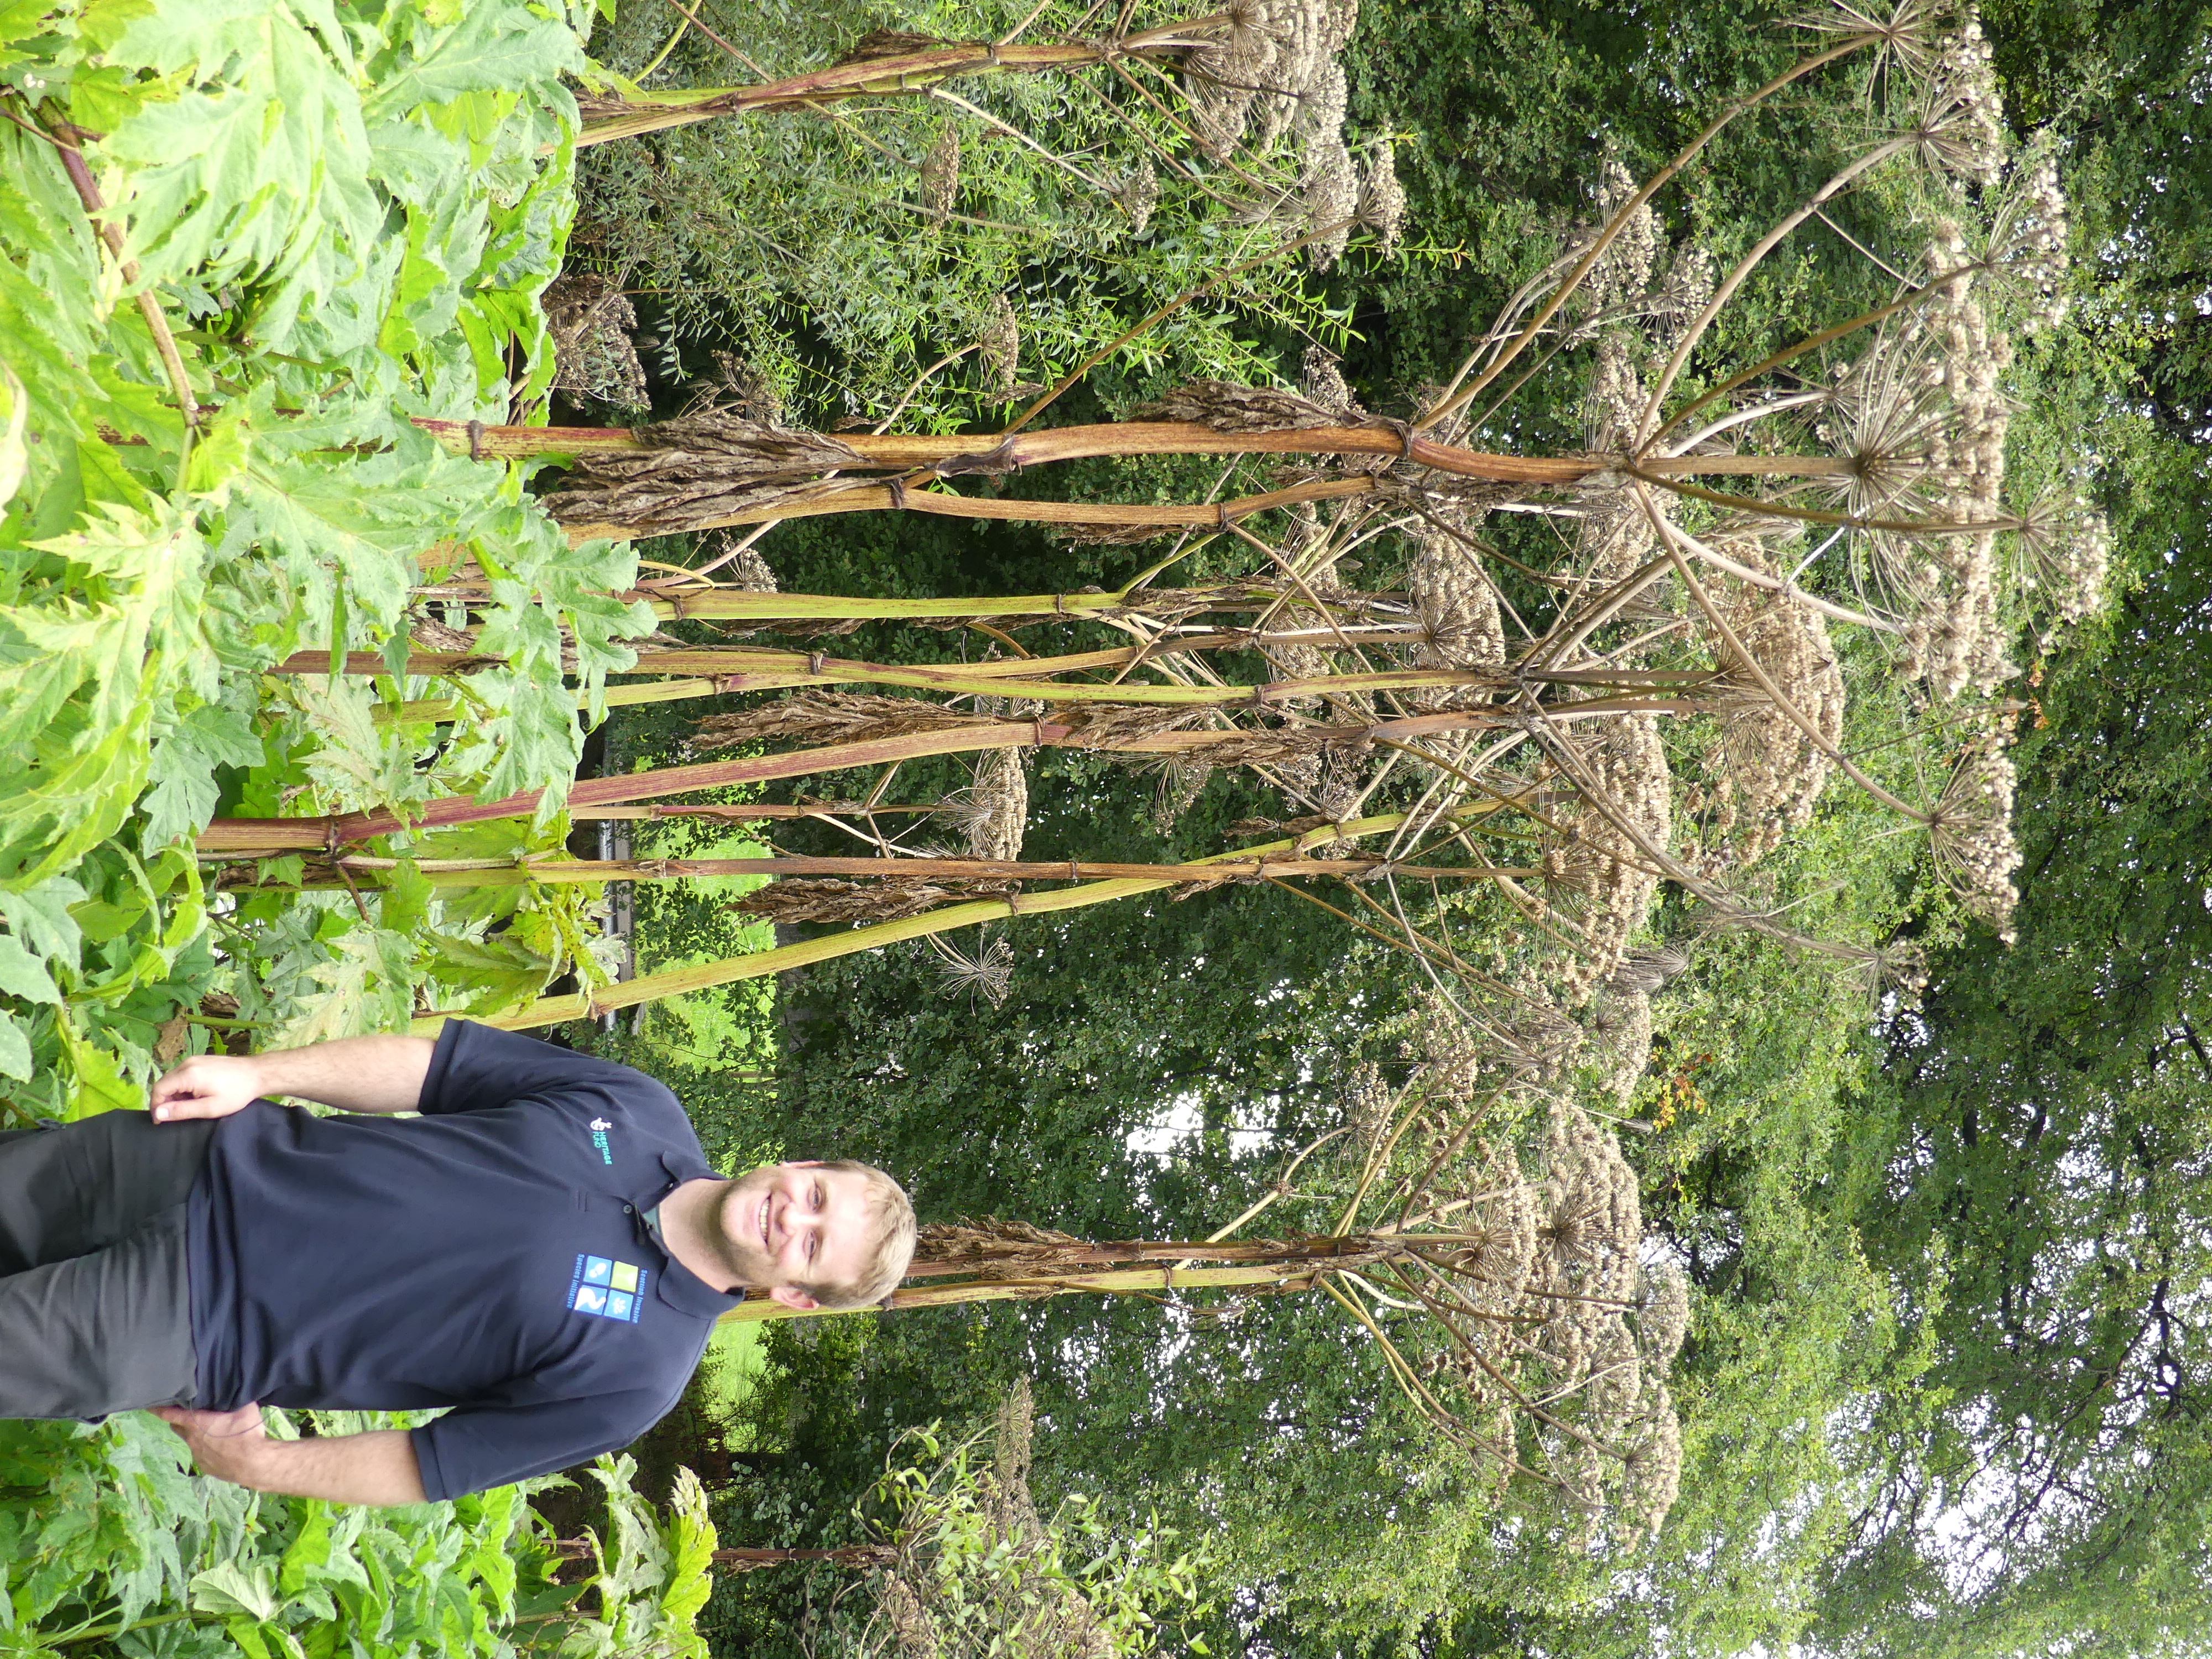 Man standing next to giant hogweed - meters taller than him